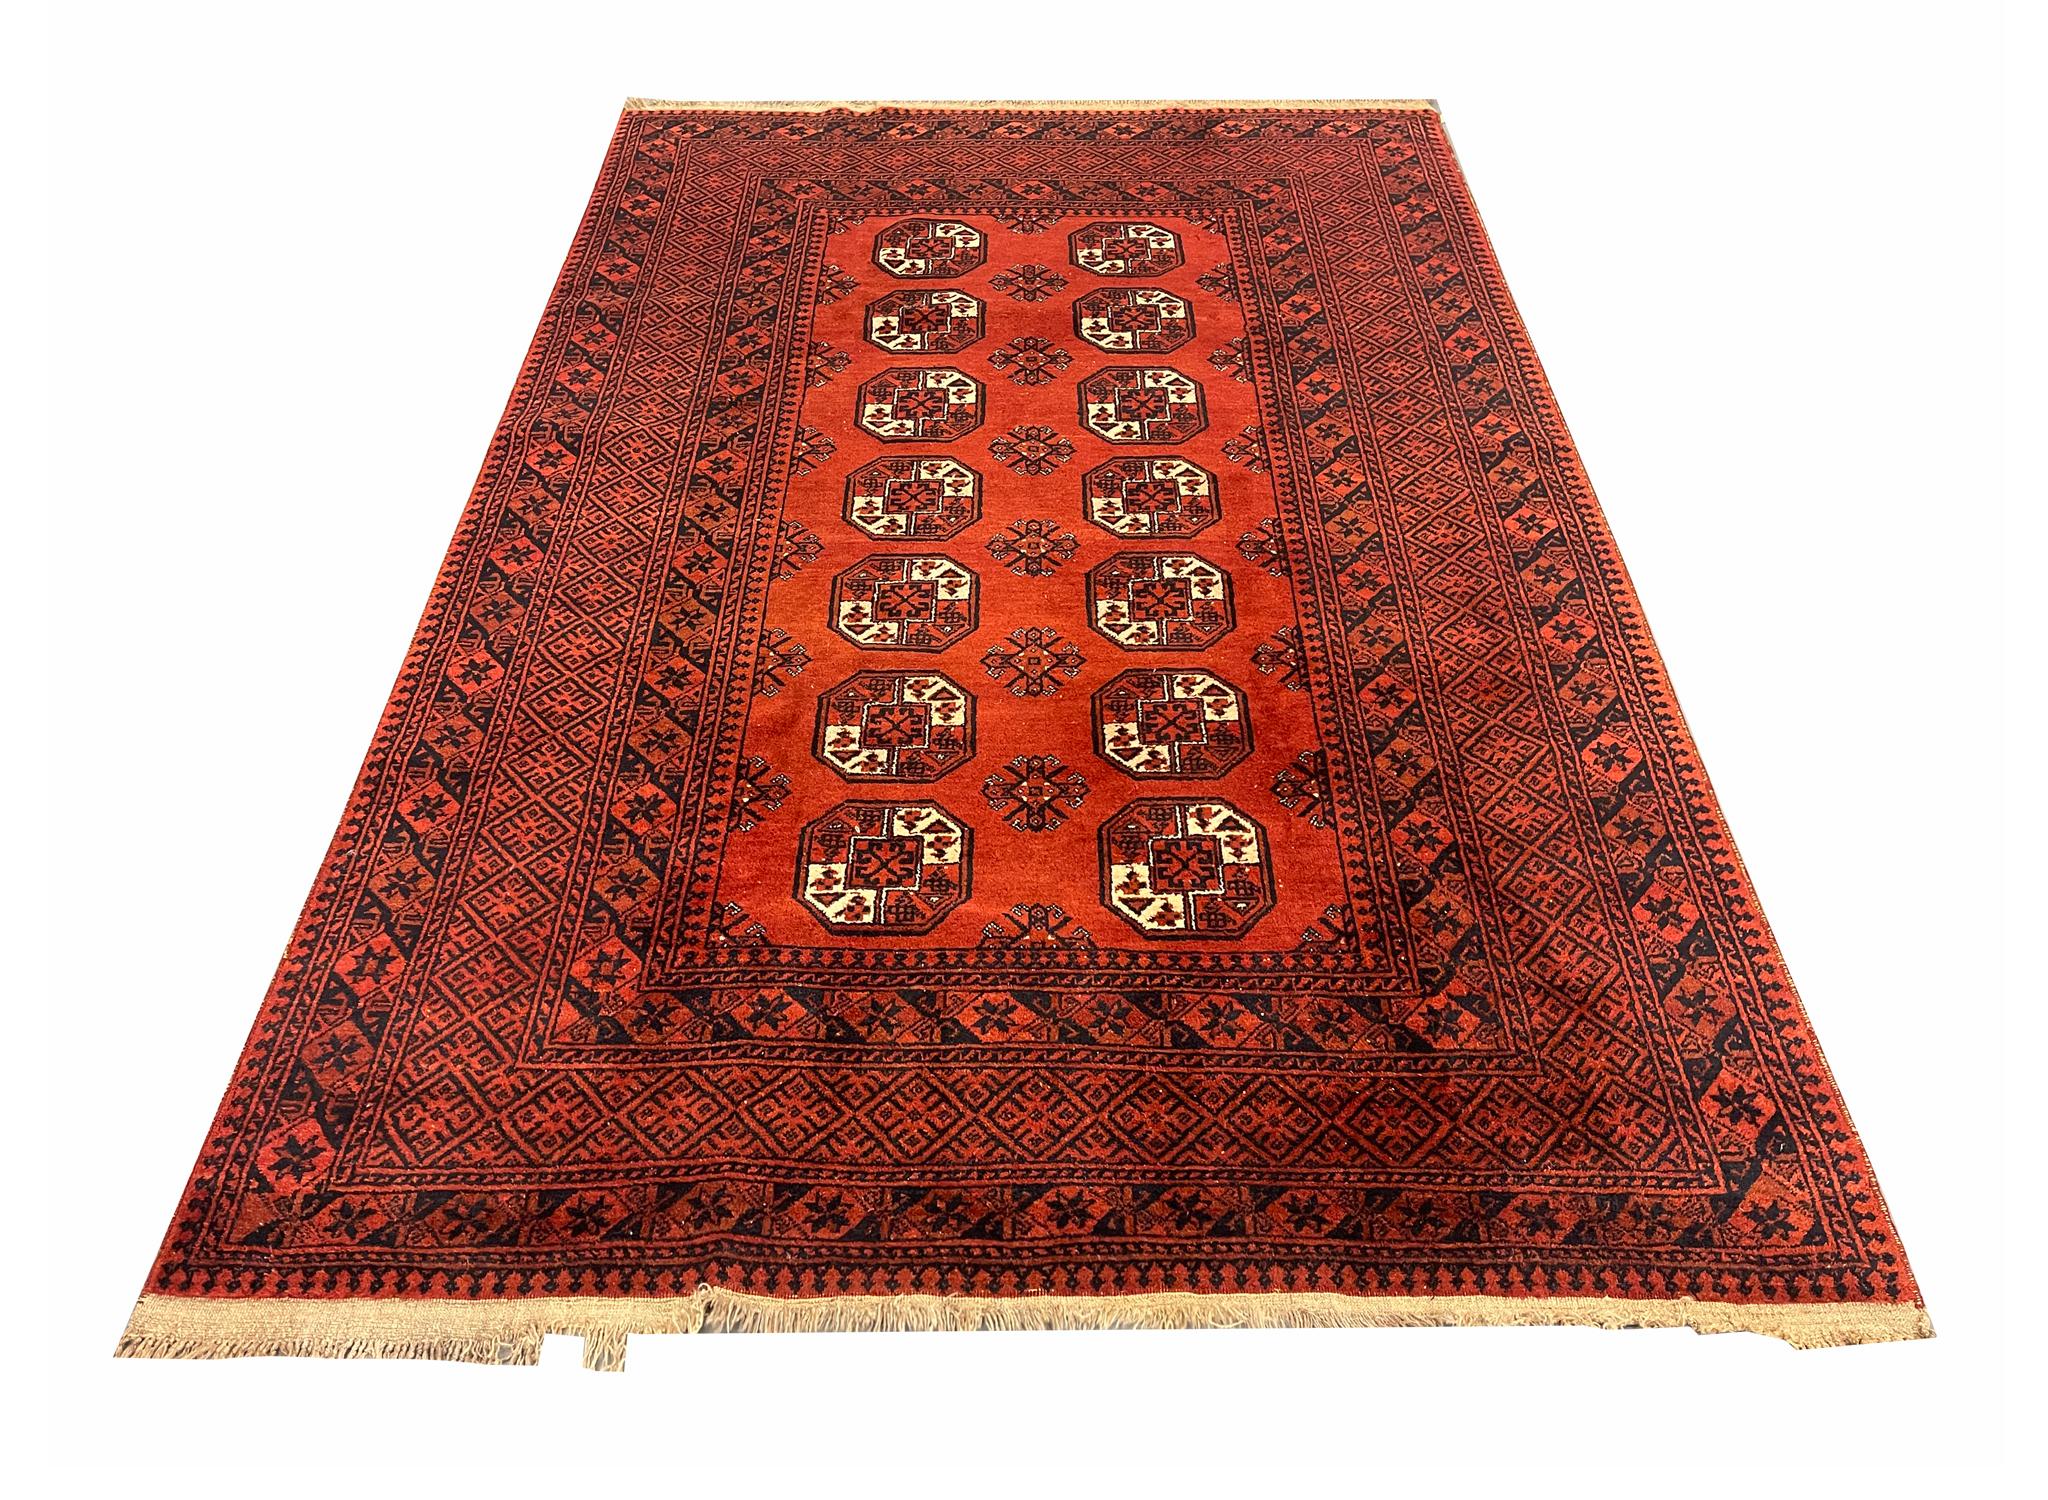 Decorated with a unique colour pallet of gold, red and deep blue this fantastic wool rug is sure to uplift any room it's introduced to. Featuring a detailed all-over medallion with a highly-detailed floral surround design and border. The colour and